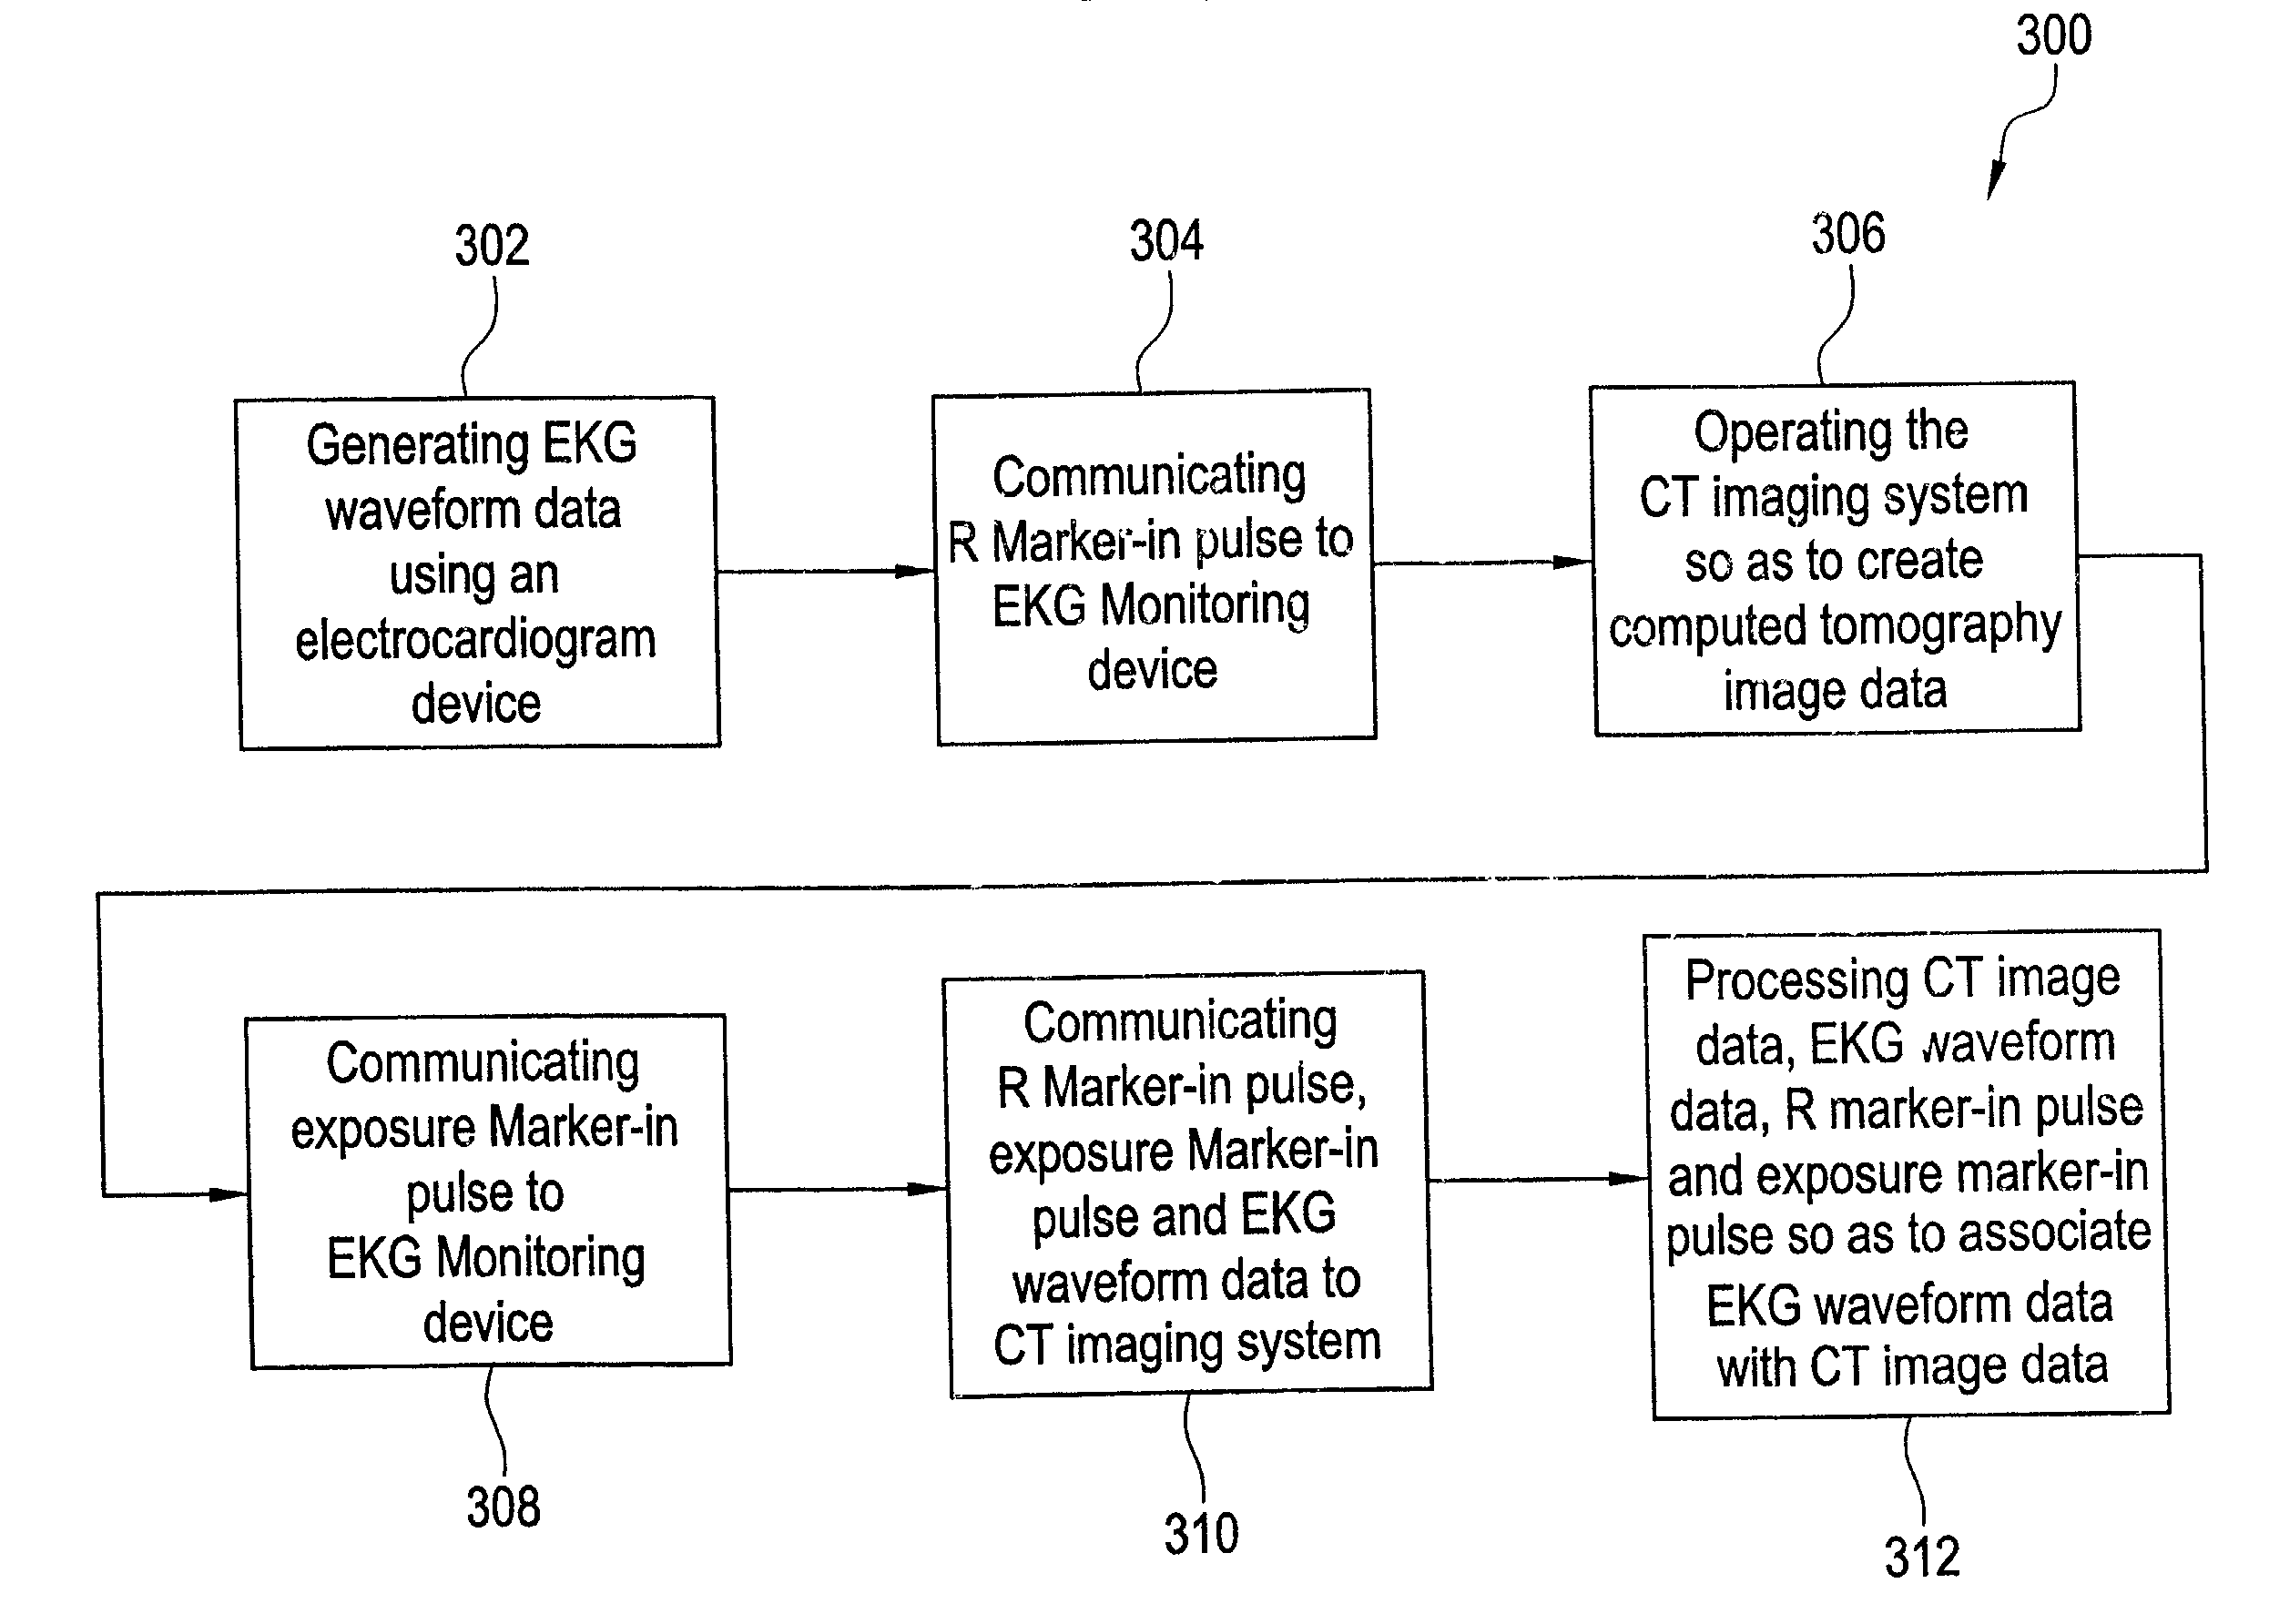 Method and system for associating an EKG waveform with a CT image